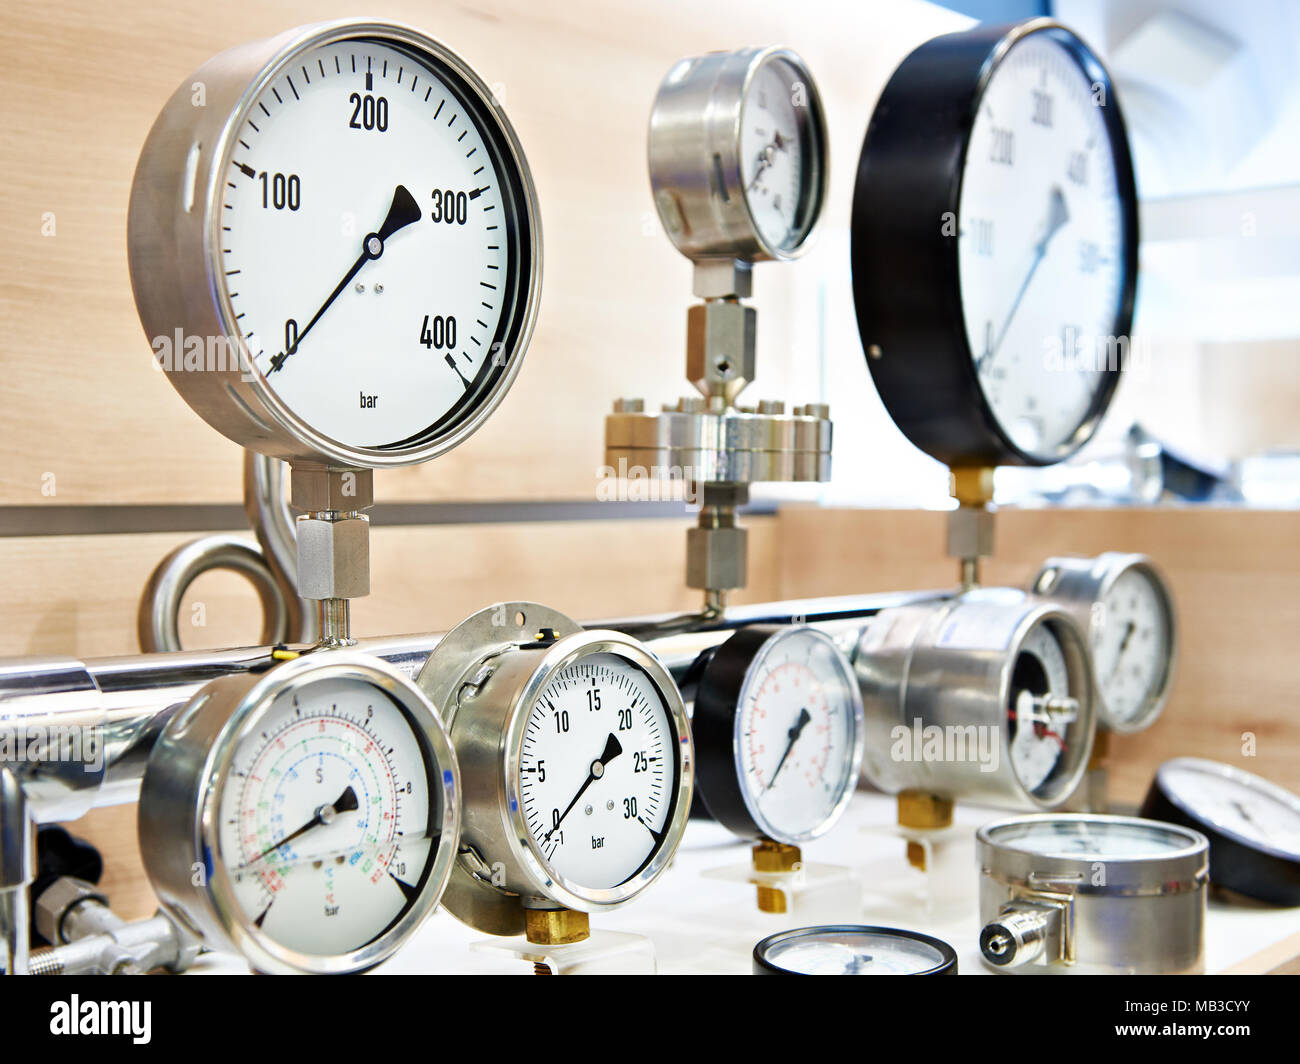 Industrial installation with manometers Stock Photo